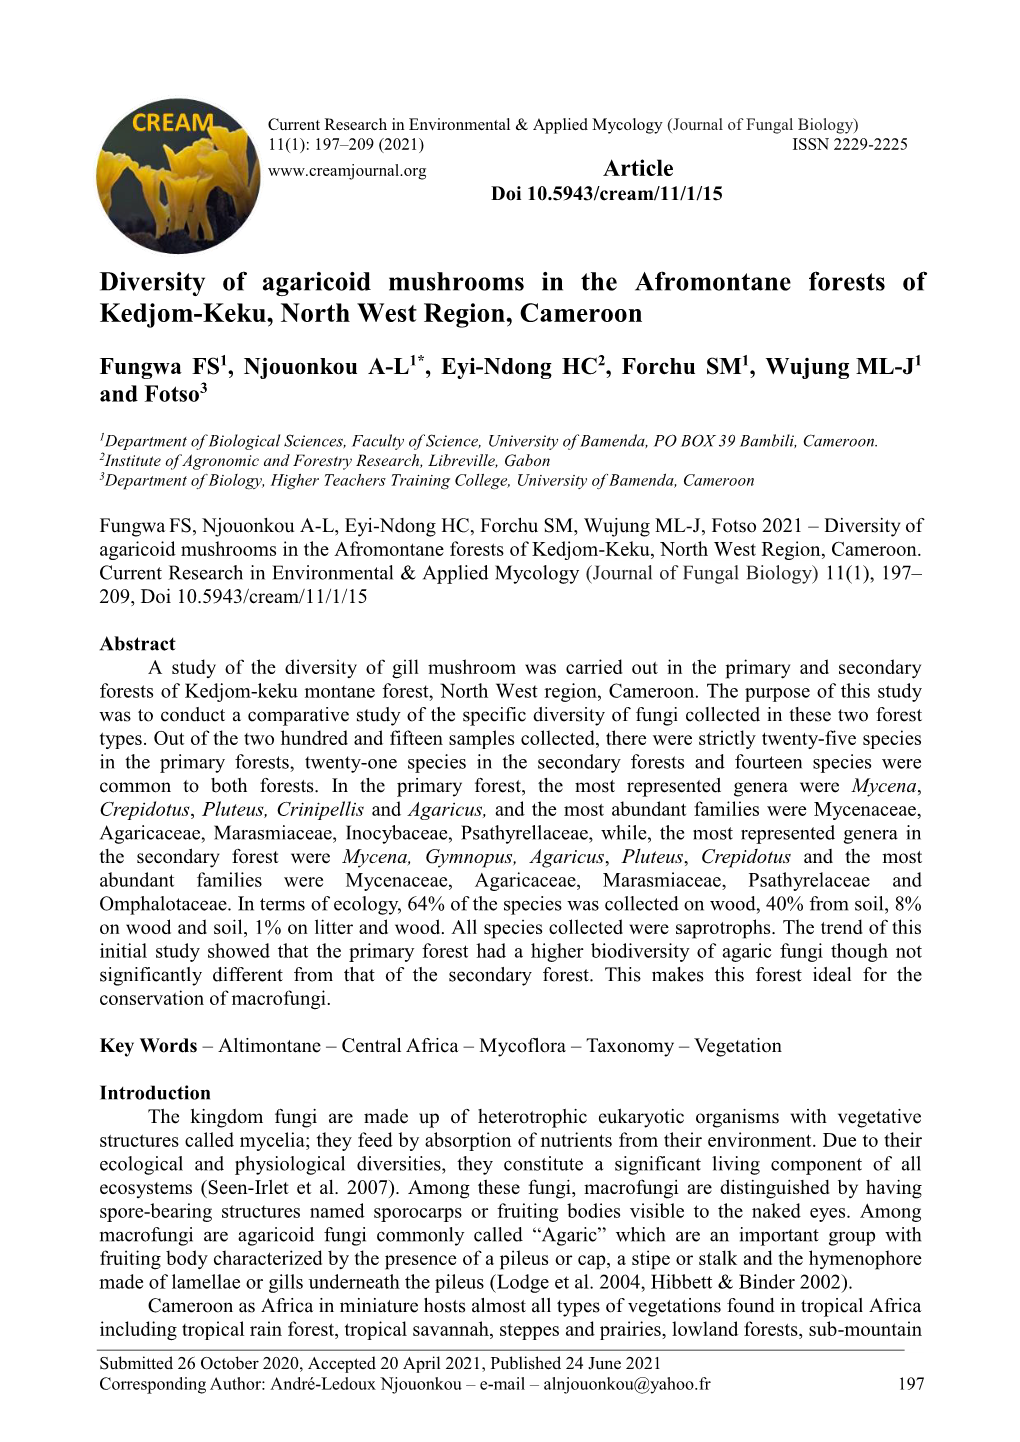 Diversity of Agaricoid Mushrooms in the Afromontane Forests of Kedjom-Keku, North West Region, Cameroon